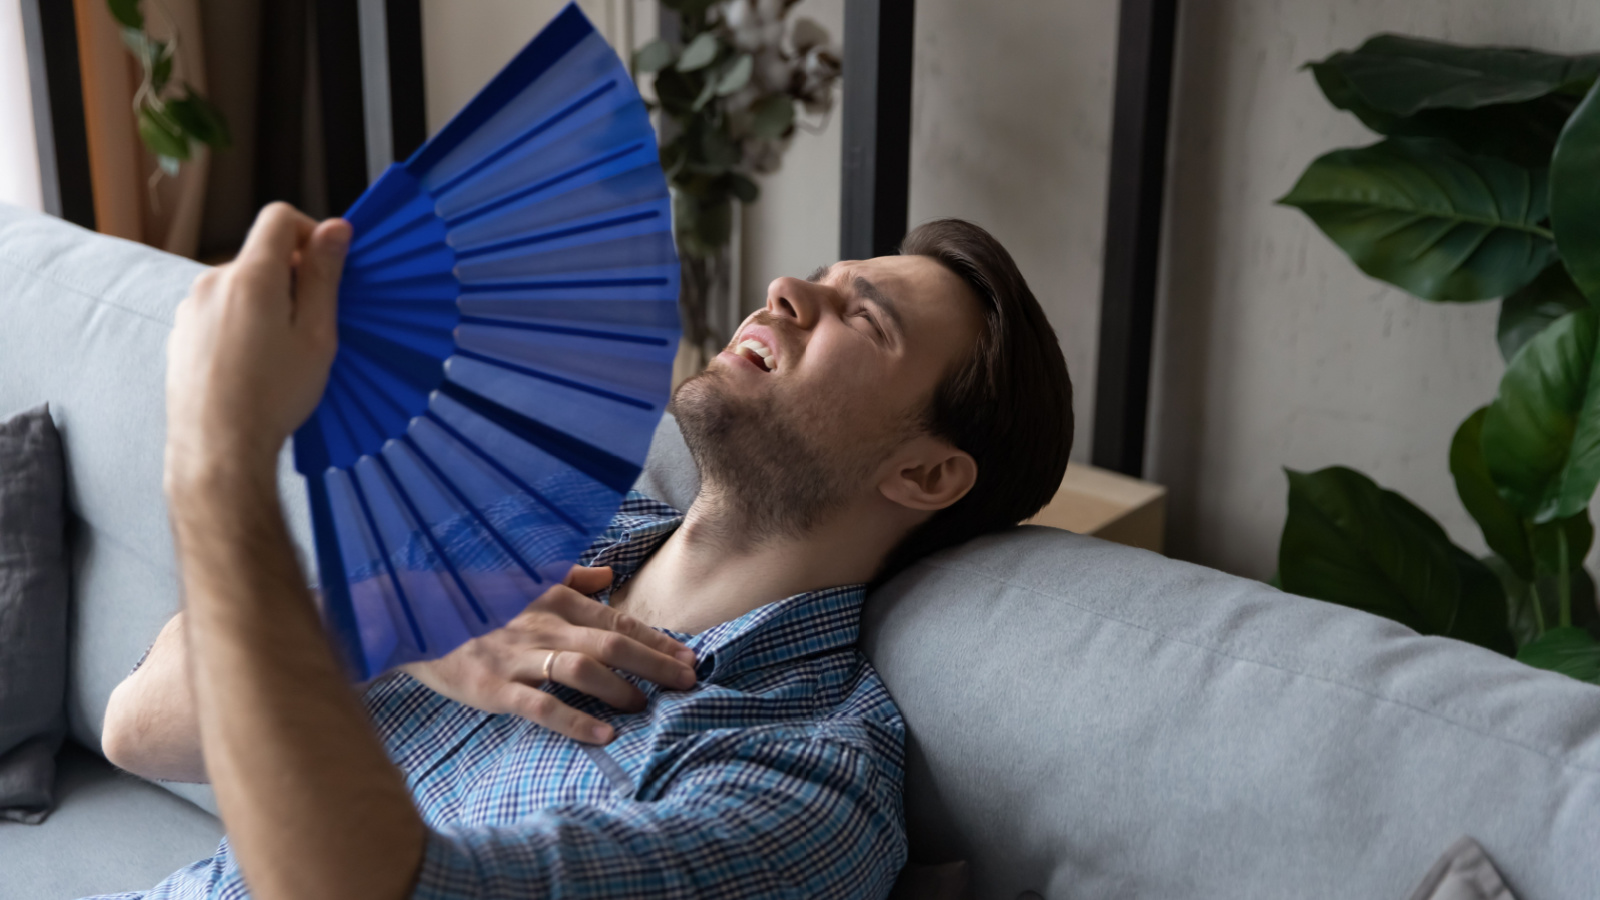 How to Stay Cool and Comfortable in a Heatwave | St. Louis AC Services | Emergency AC Repair Near Me